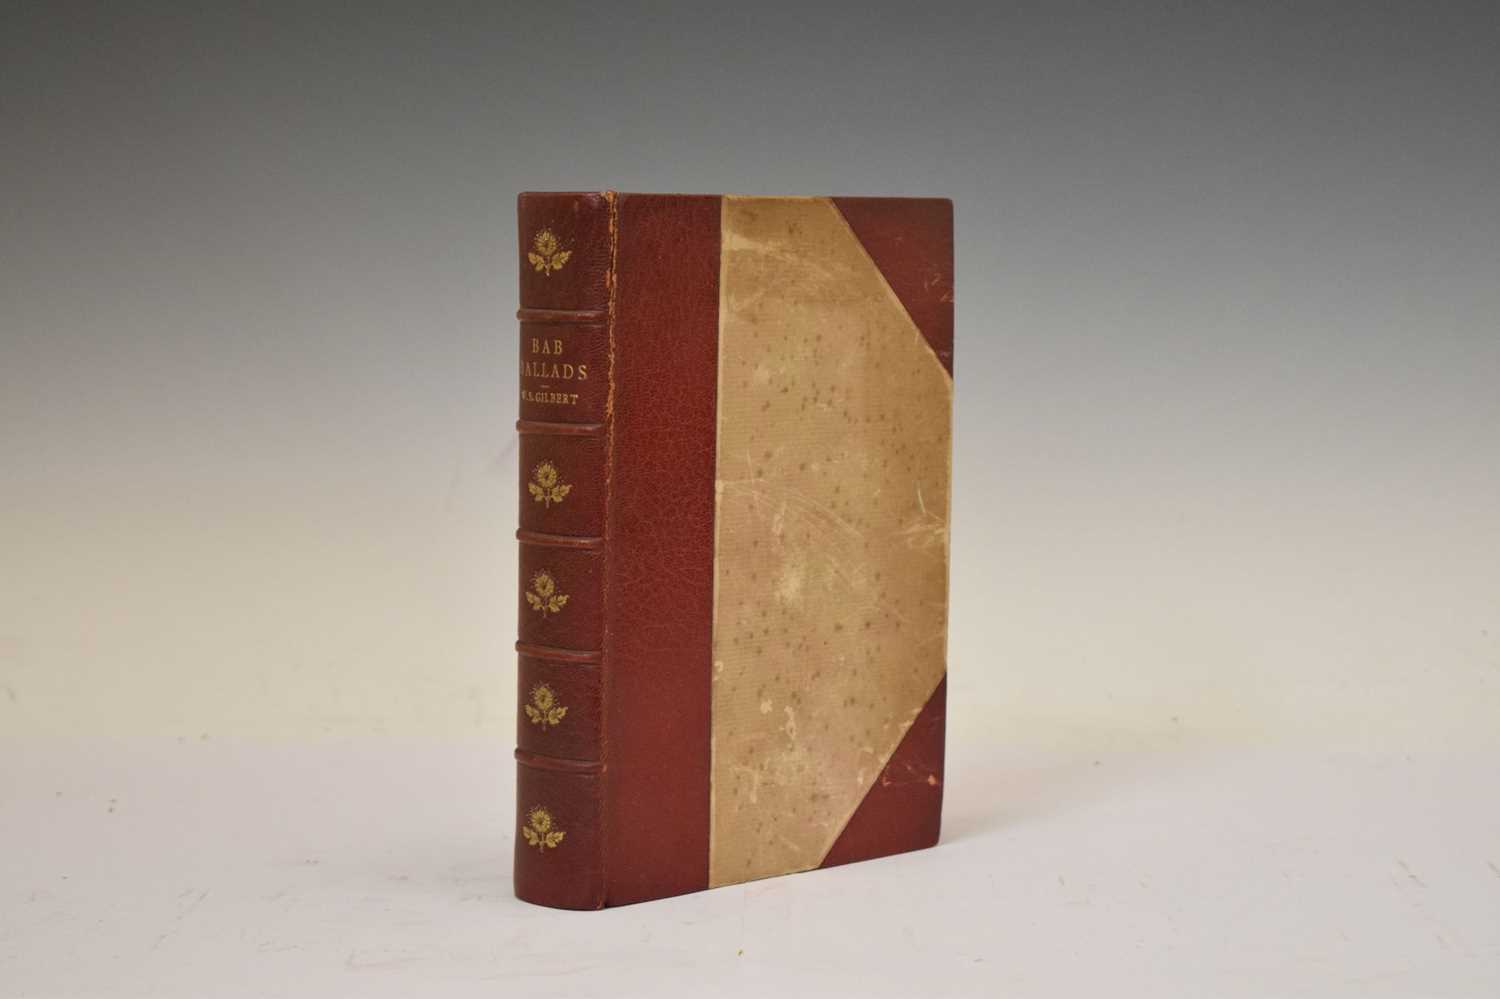 Gilbert, W. S. - 'The Bab Ballads' - Fourth edition 1899, signed leather binding - Image 2 of 10